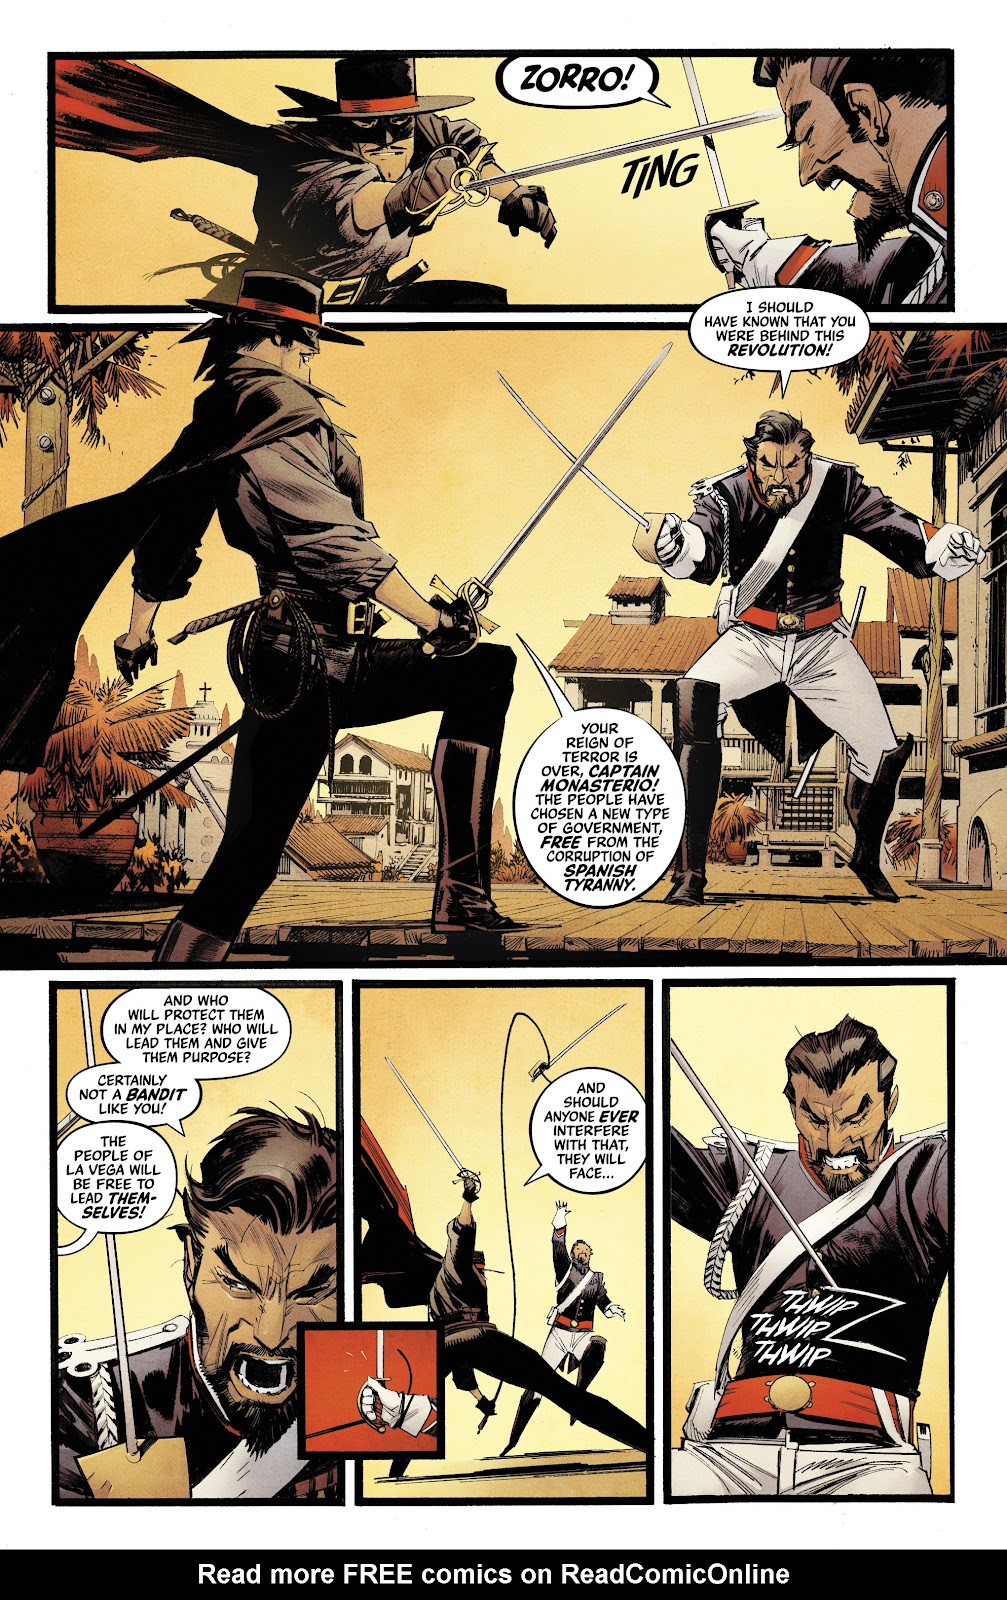 Zorro: Man of the Dead issue 1 - Page 3